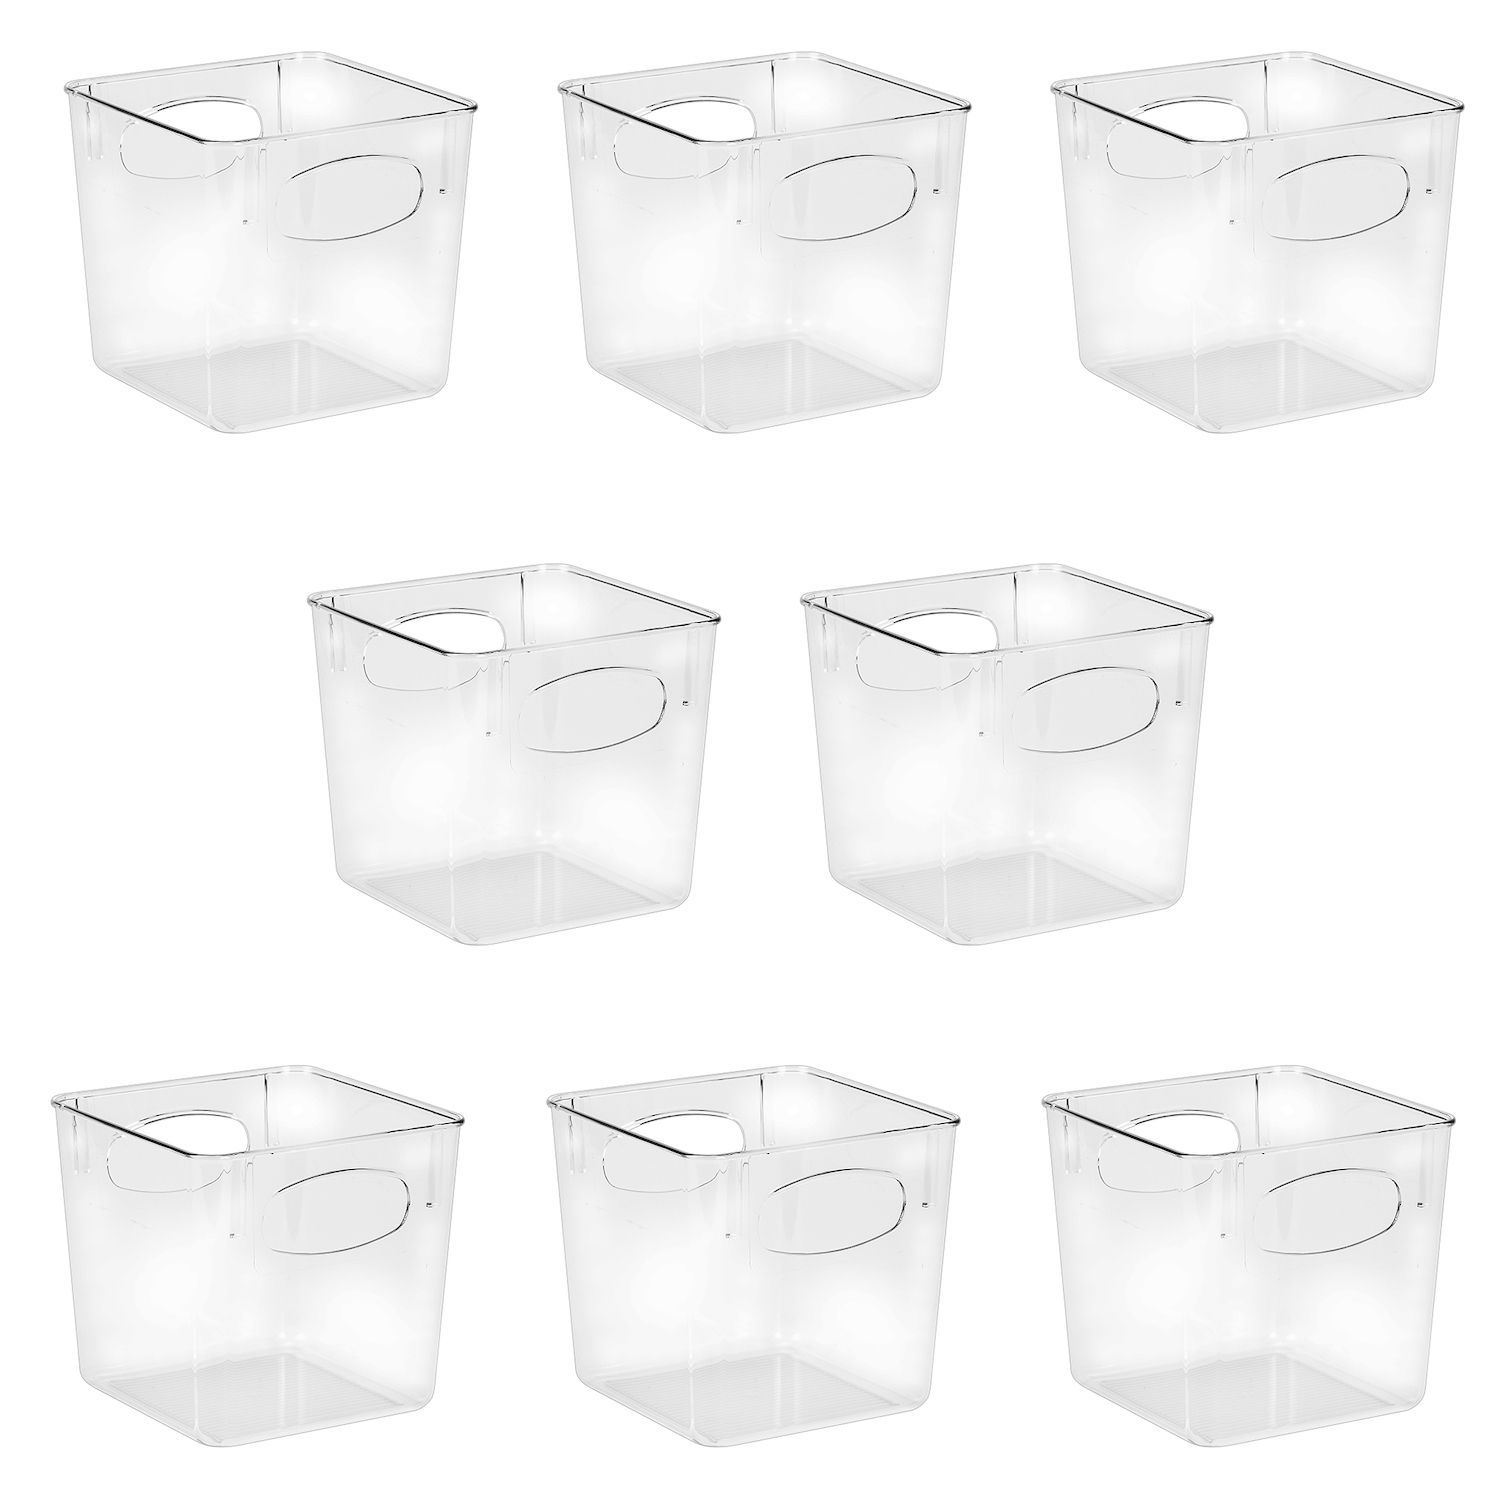 Snapware Total Solution Pyrex 4-cup Covered Square Container